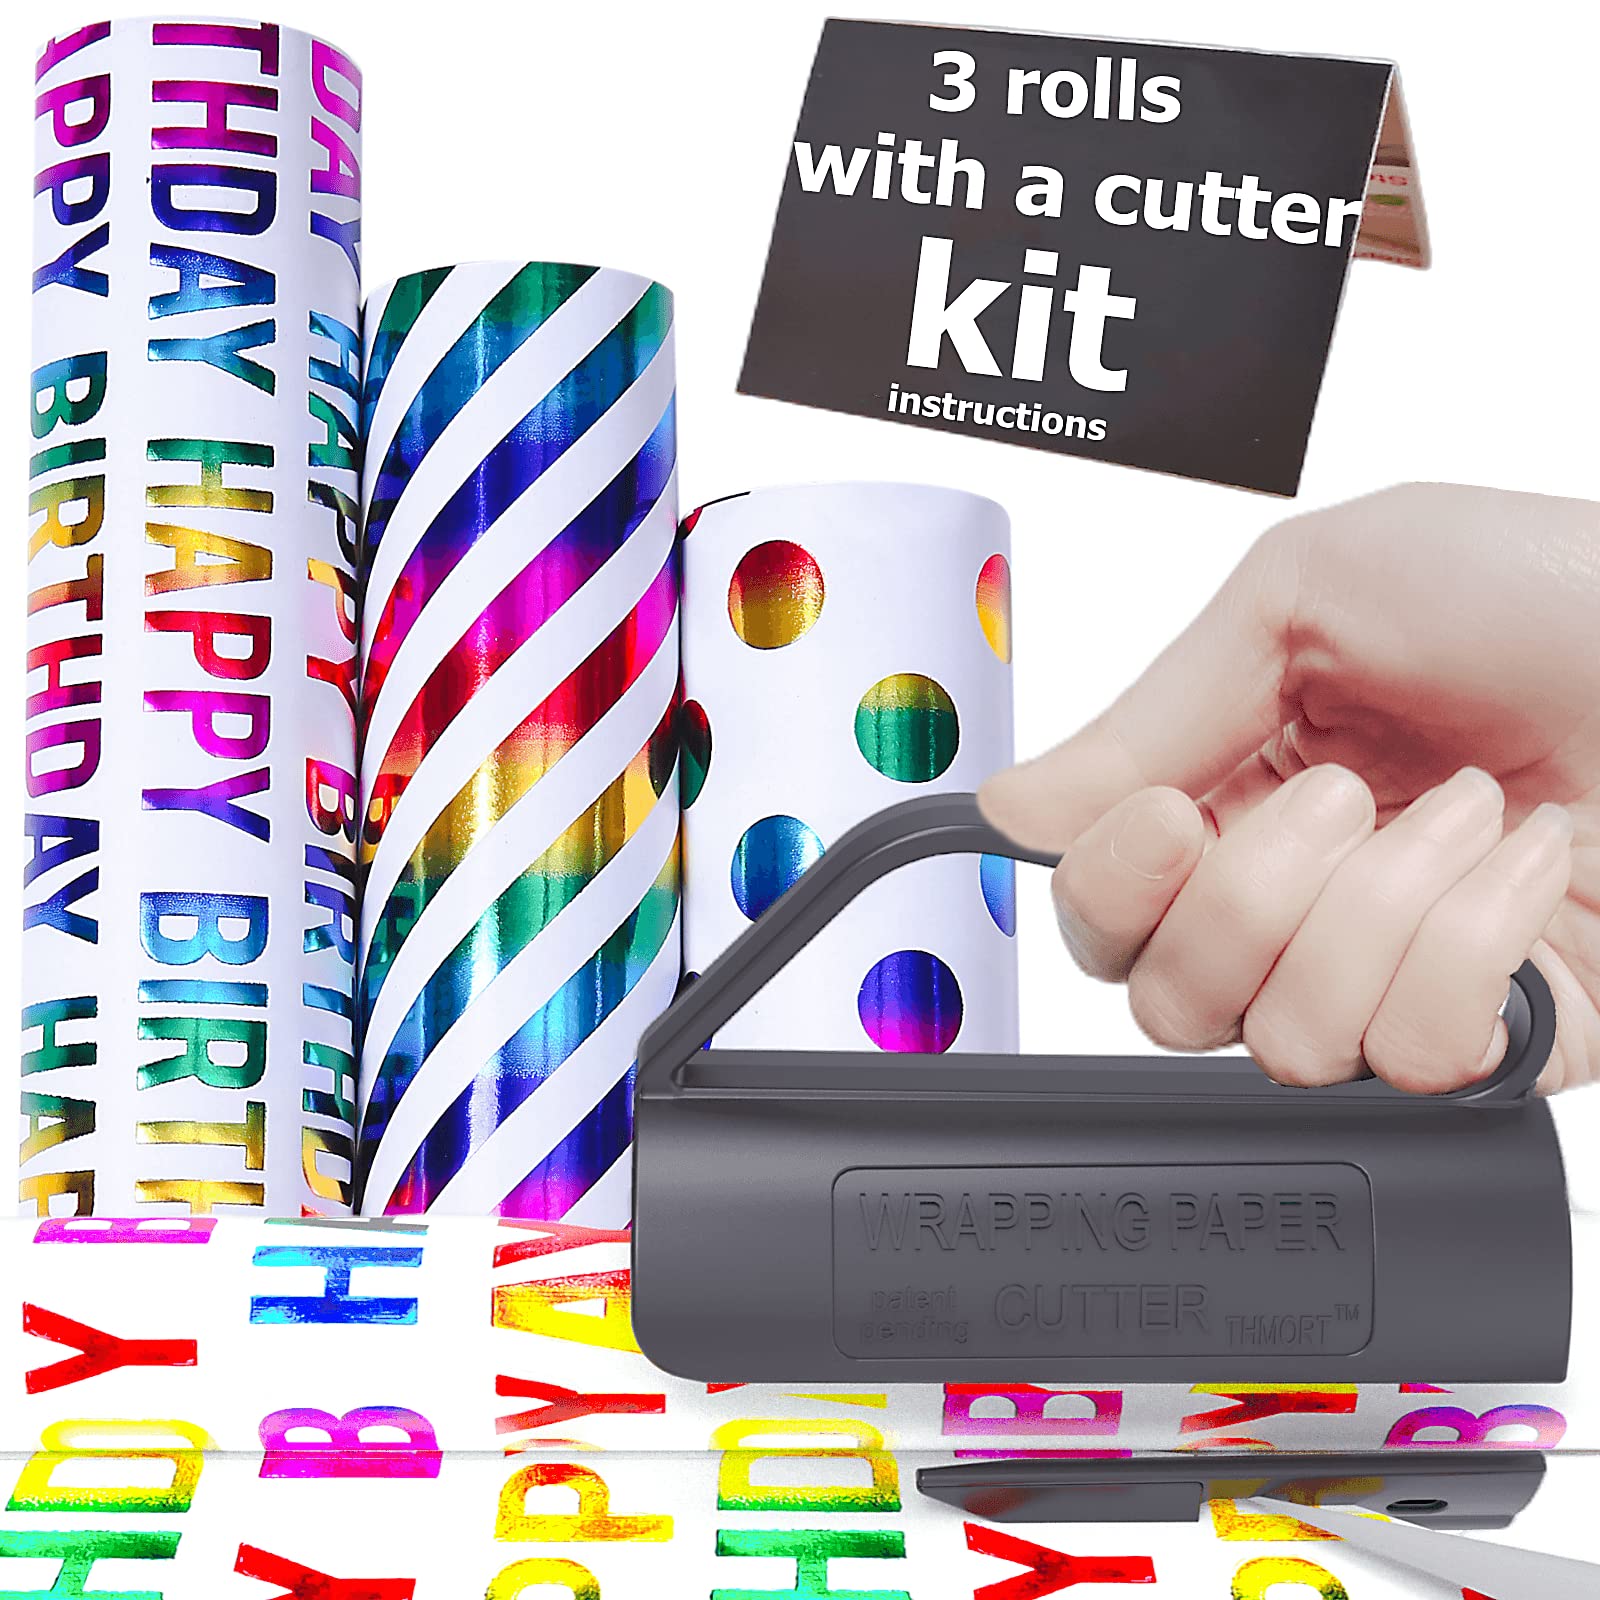 THMORT Birthday Wrapping Paper Roll with a Cutter Kit for Boys&Girls,Adults,Kids Foil mini rolls 17 Inch X 120 Inch Gift Wrapping Paper Roll Colorful Foil Rainbow Silver Happy Birthday Lettering.